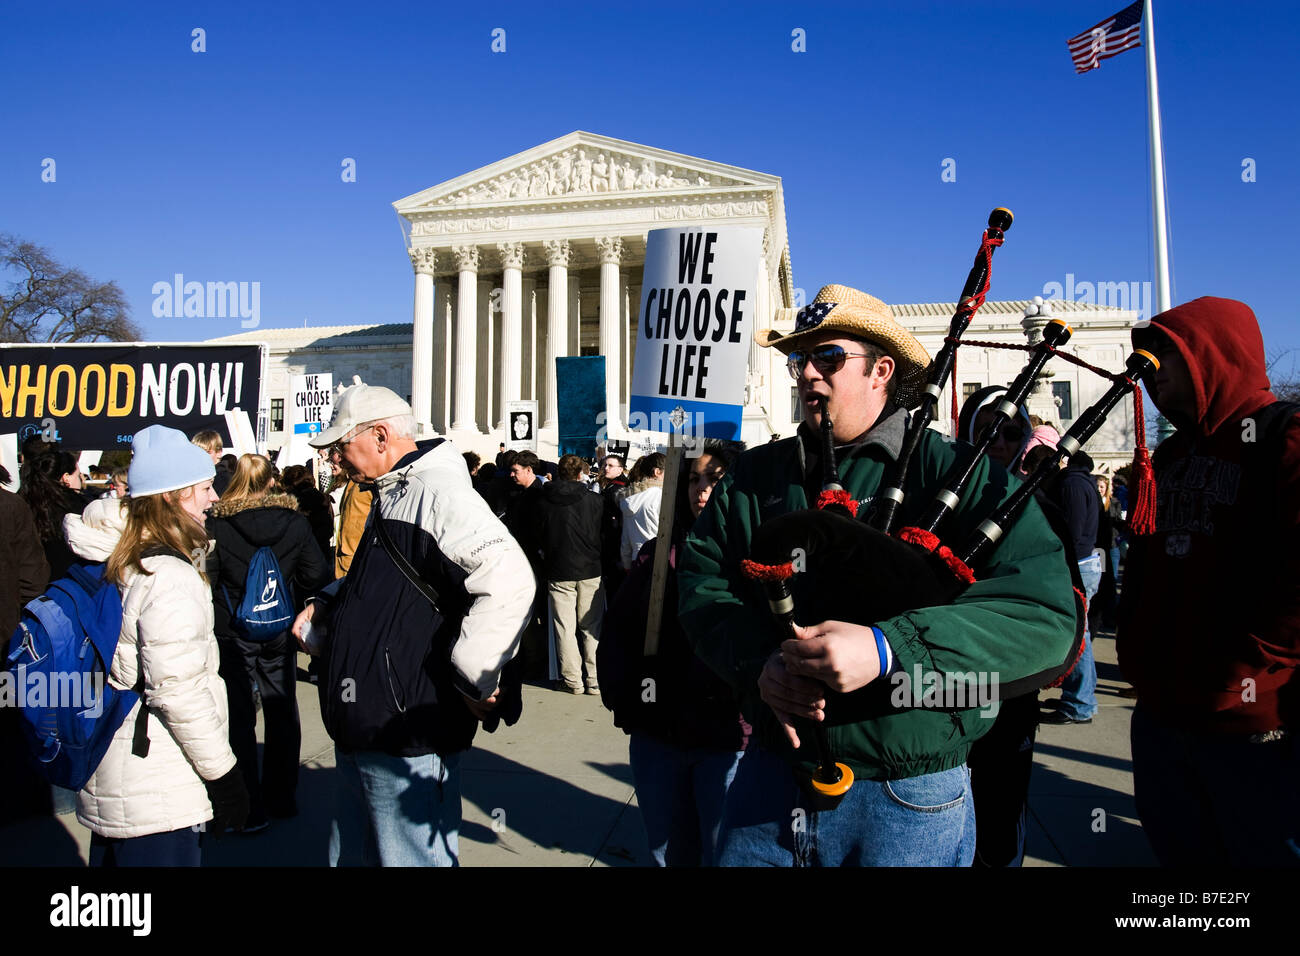 A Pro-Life supporter plays the bagpipes in front of the US Supreme Court - March for Life Rally, 2009 - Washington, DC USA Stock Photo